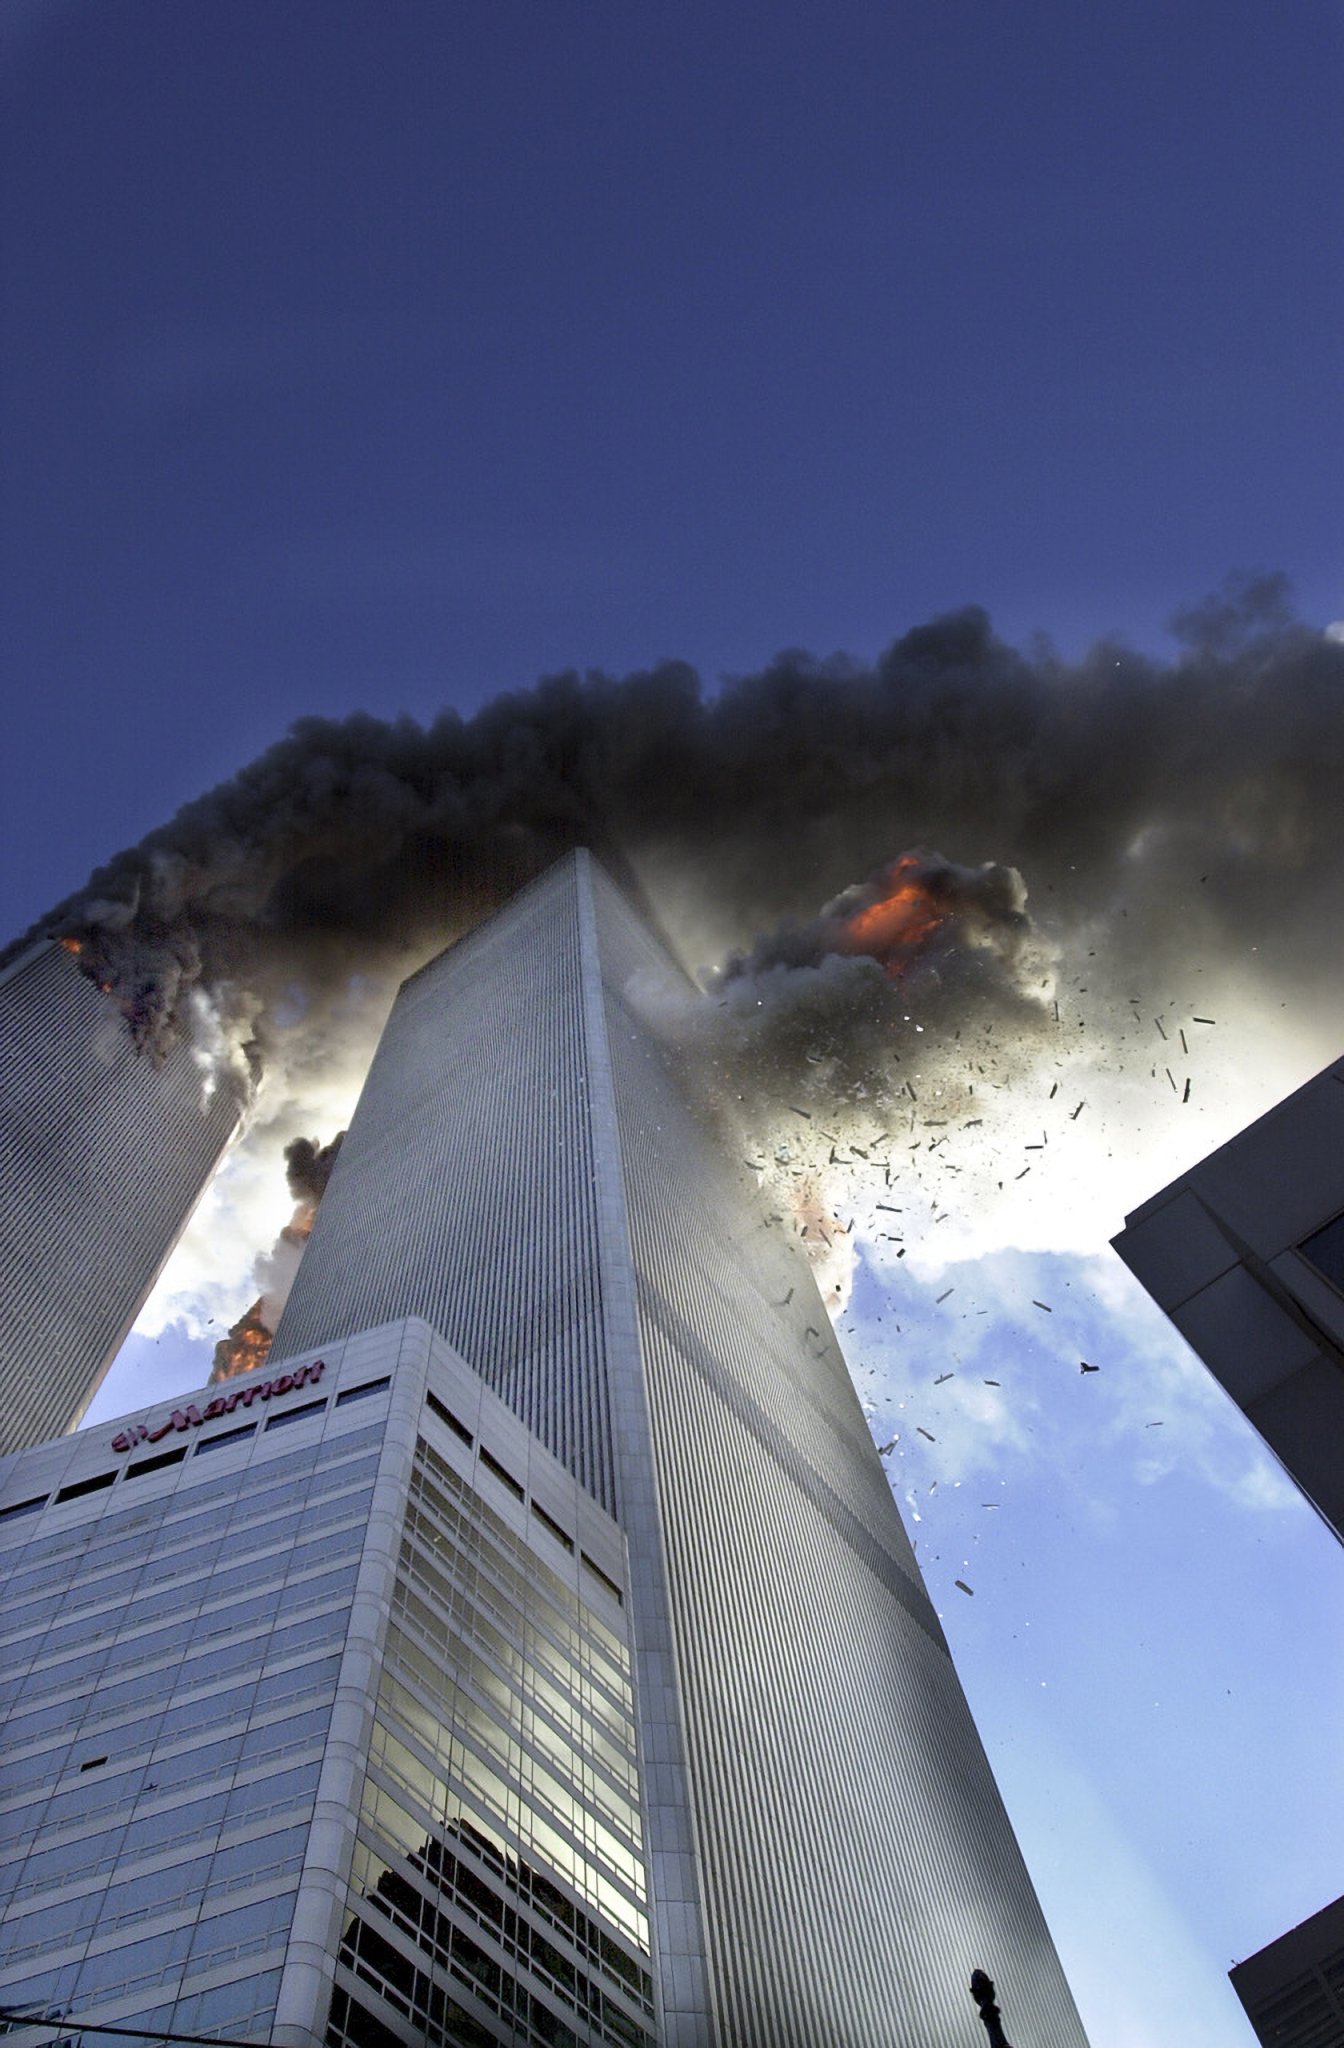 David Handschuh Shot one of the Most Iconic Photos of 9/11